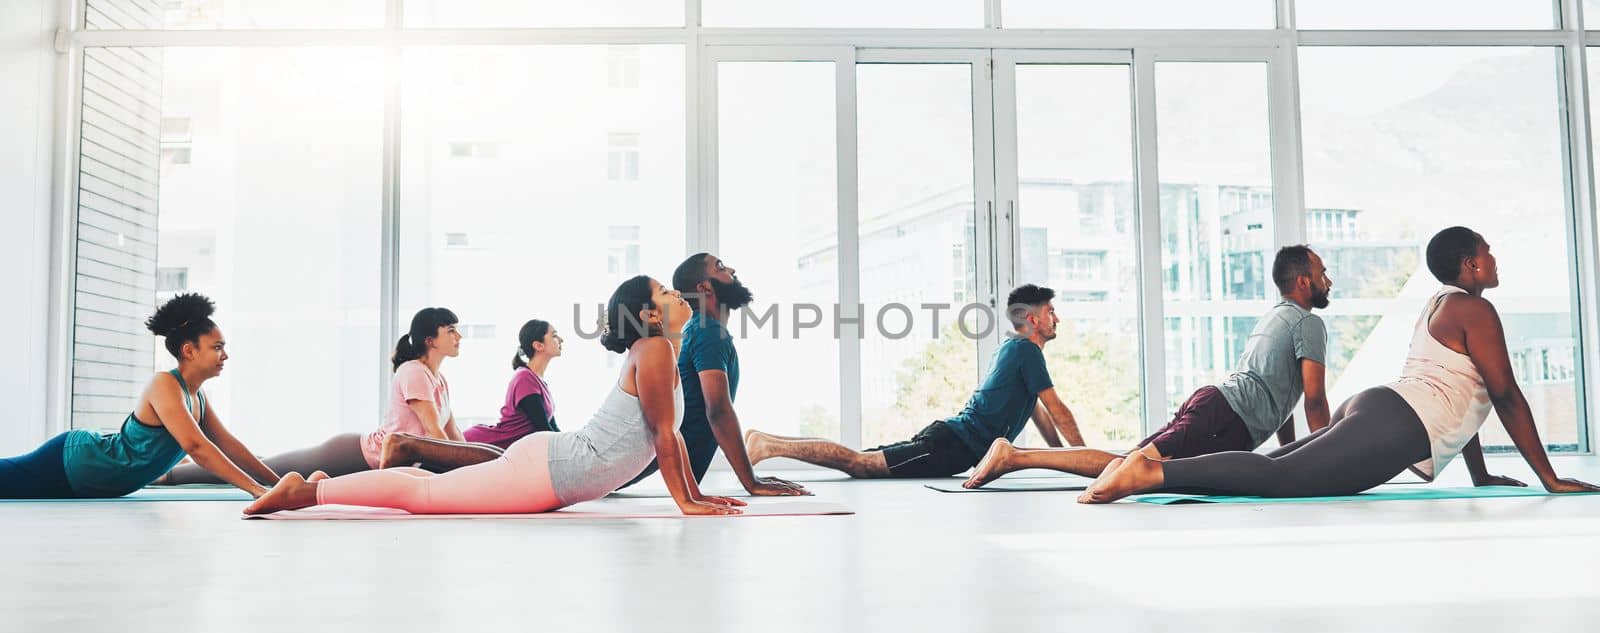 Yoga class, fitness and exercise with people together for health, diversity and wellness. Men and women in zen studio for holistic workout, mental health and body balance with cobra mockup on ground by YuriArcurs